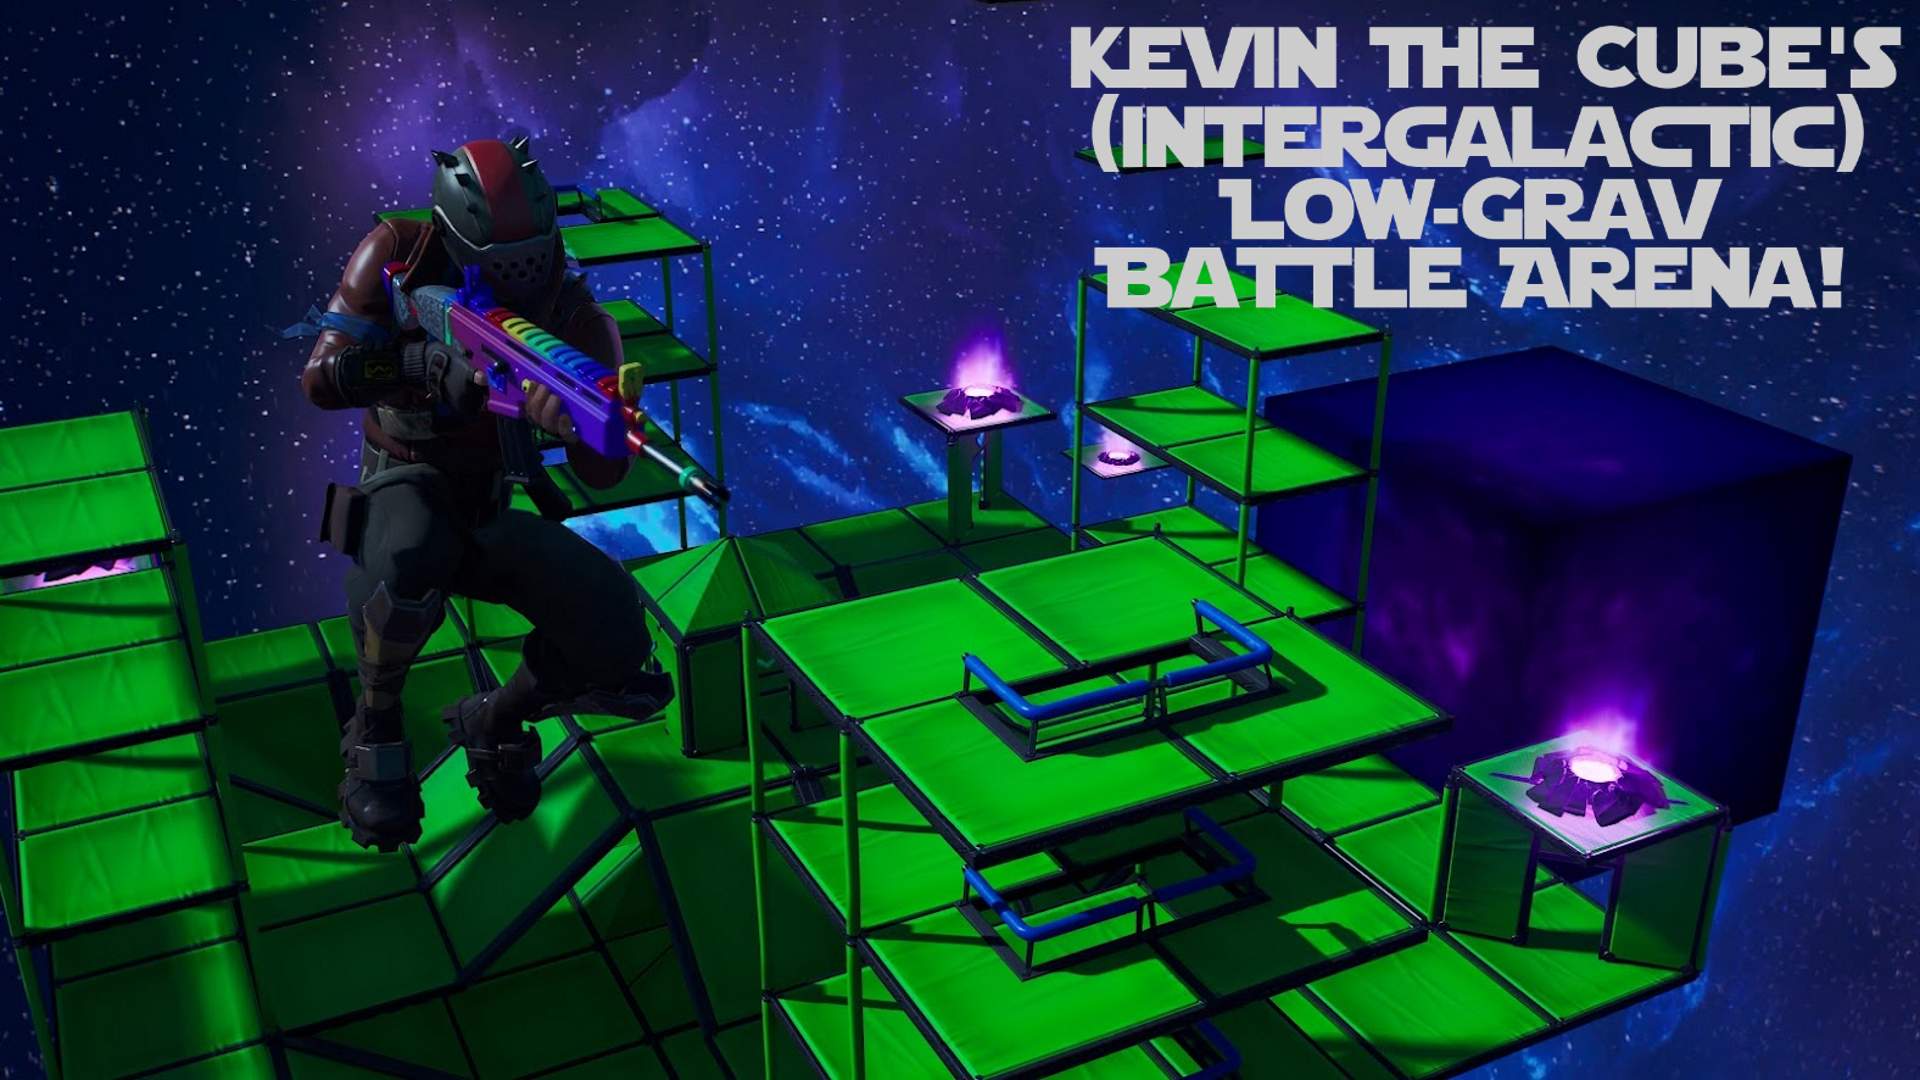 KEVIN THE CUBE'S LOW-GRAV BATTLE ARENA